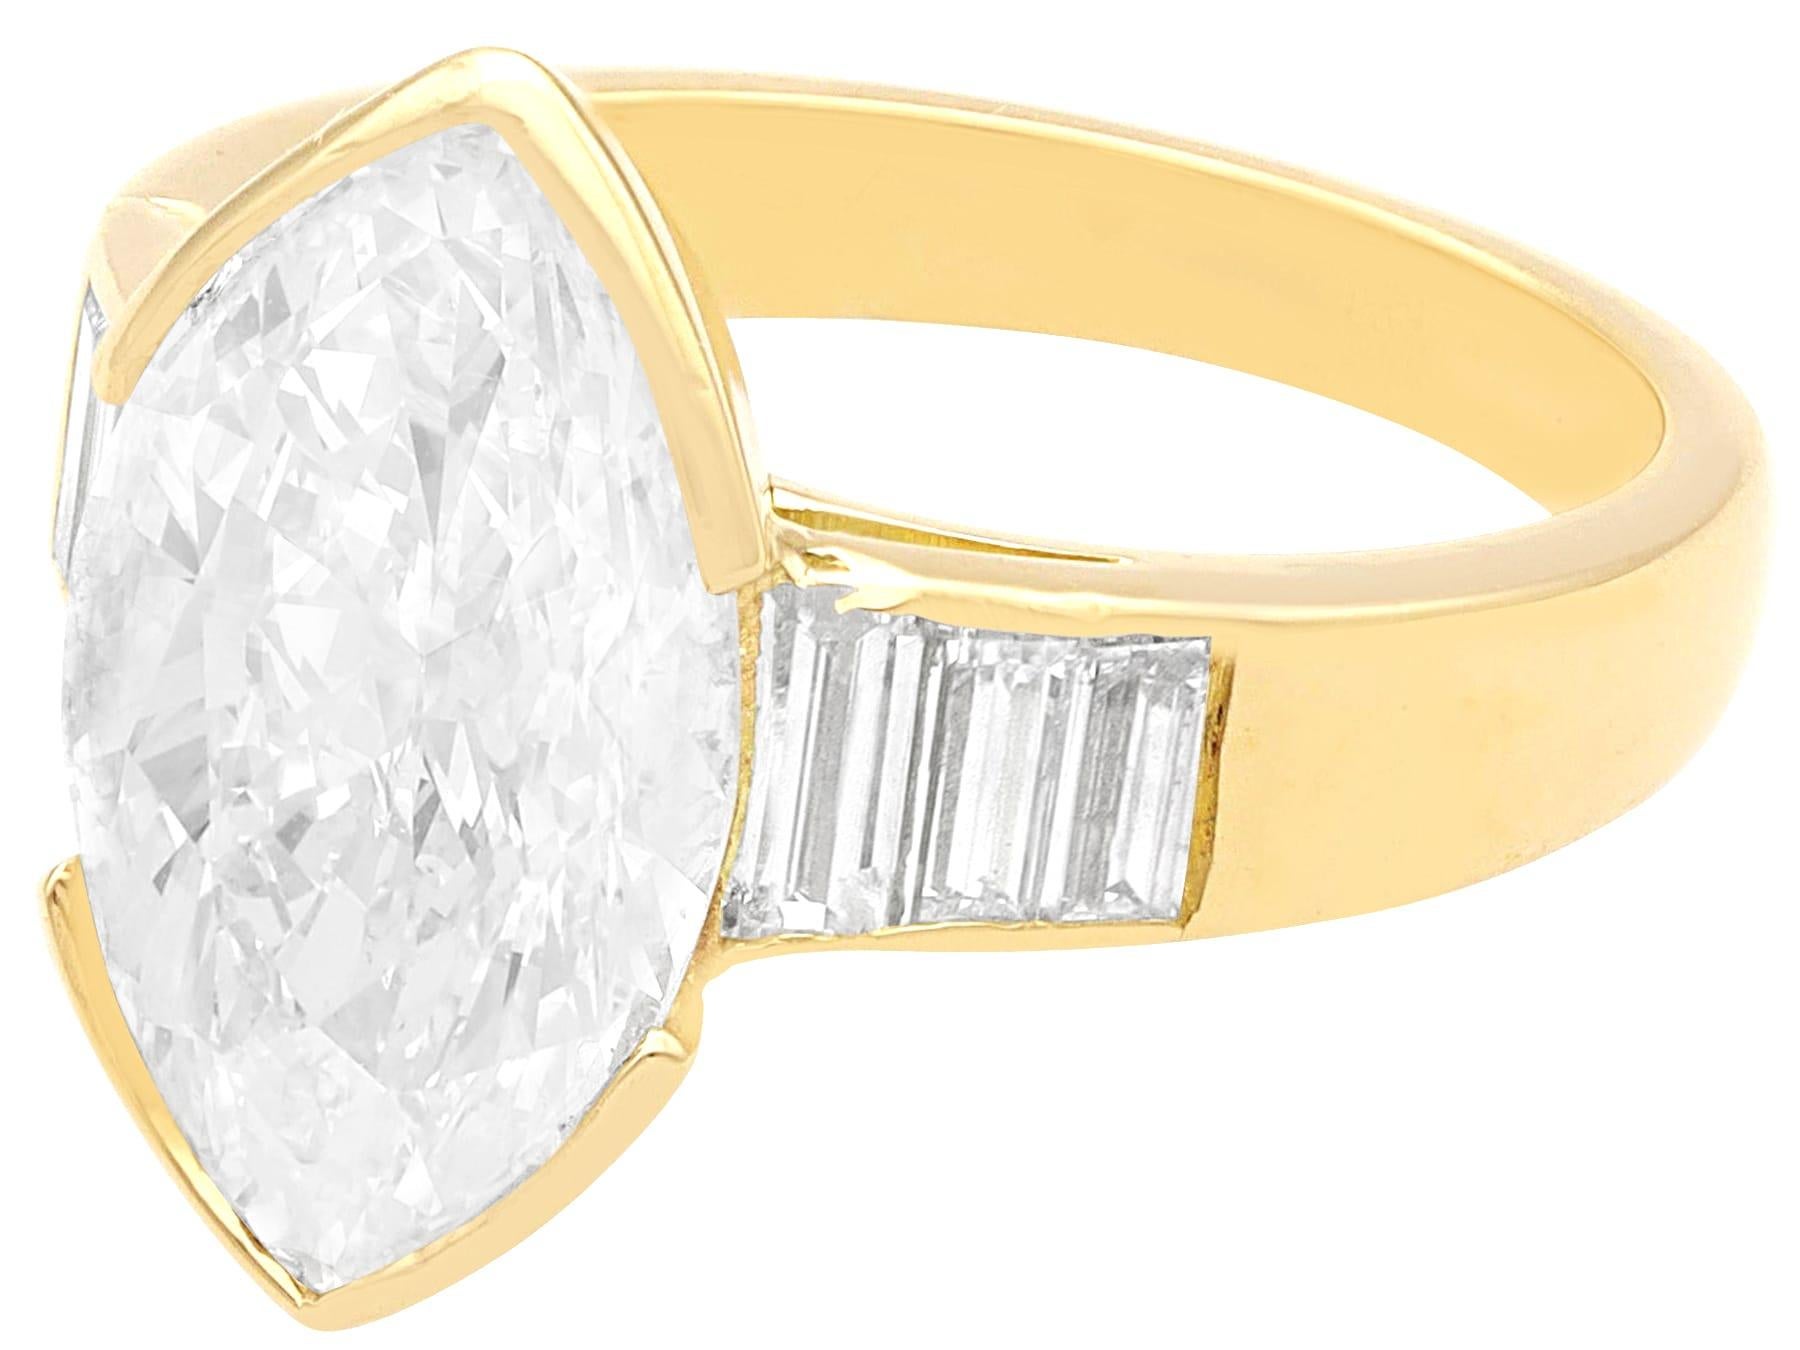 A stunning, fine and impressive, large vintage 3.93 carat diamond, 18 karat yellow gold solitaire ring: part of our vintage jewelry and jewelry collections.

This stunning, fine and impressive vintage diamond ring has been crafted in 18k yellow